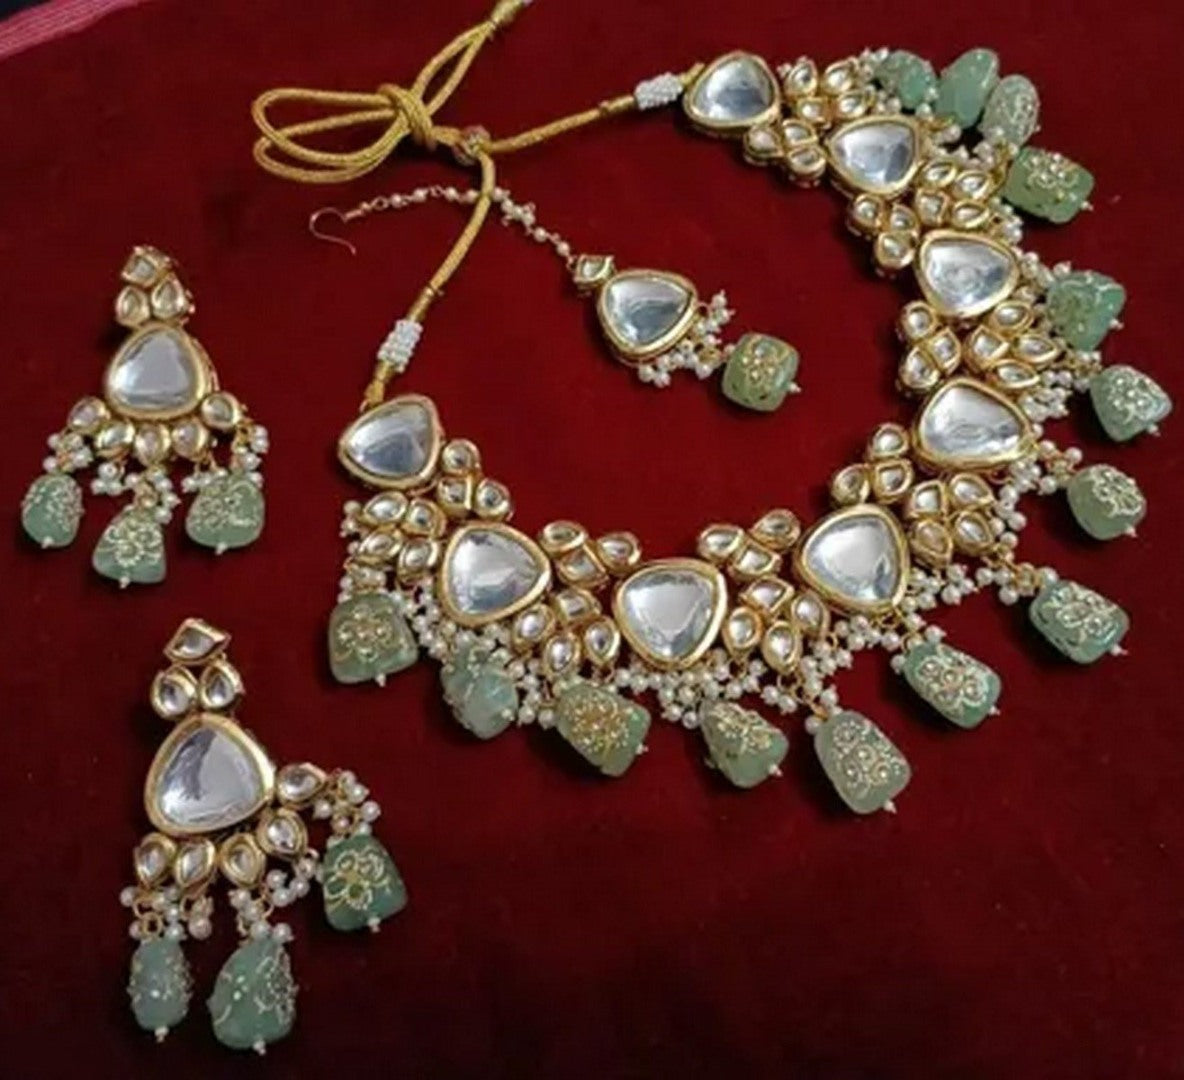 Pista Green Kundan Necklace Set With Earring For Women